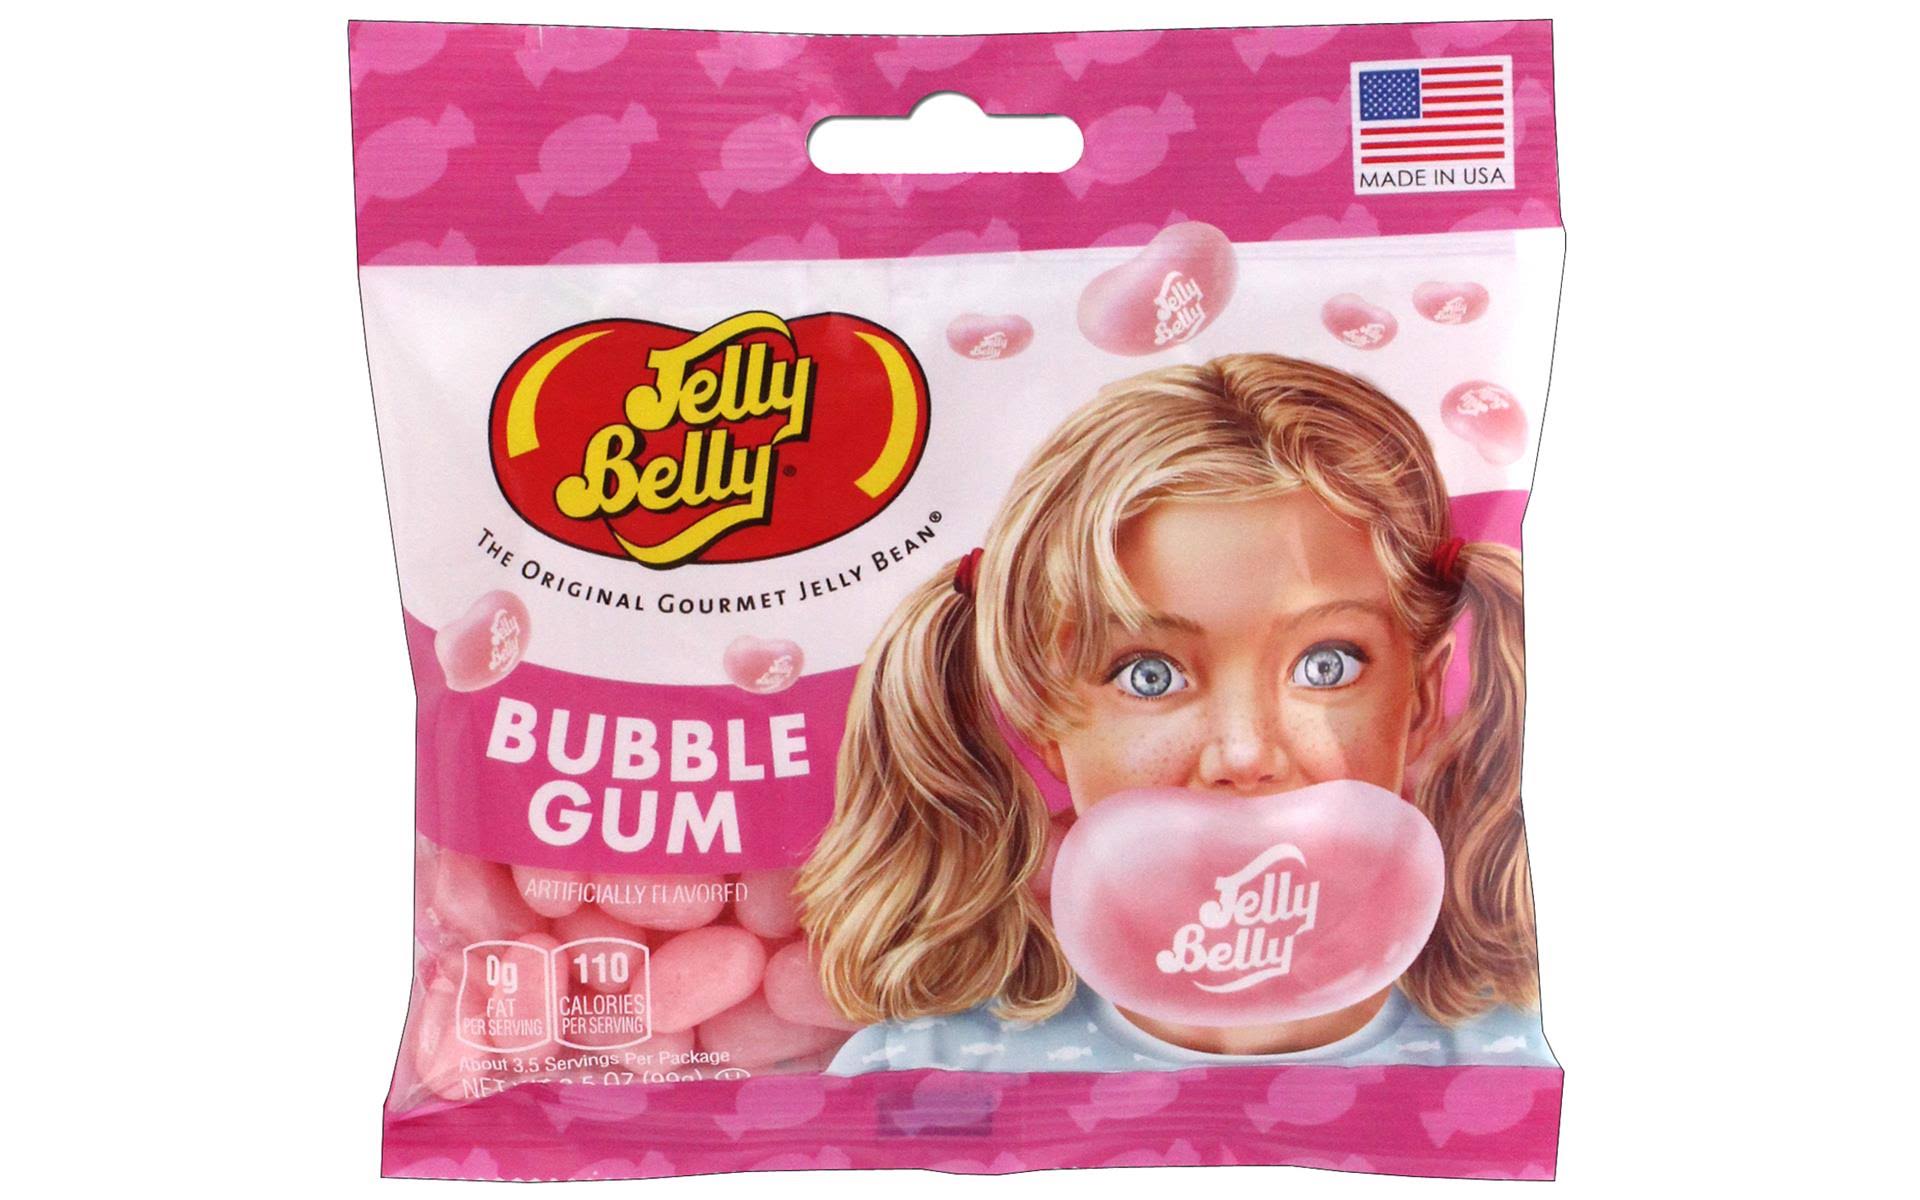 Jelly Belly Bubble Gum - Gourmet Jelly Beans, 3.5oz, 3 Pack